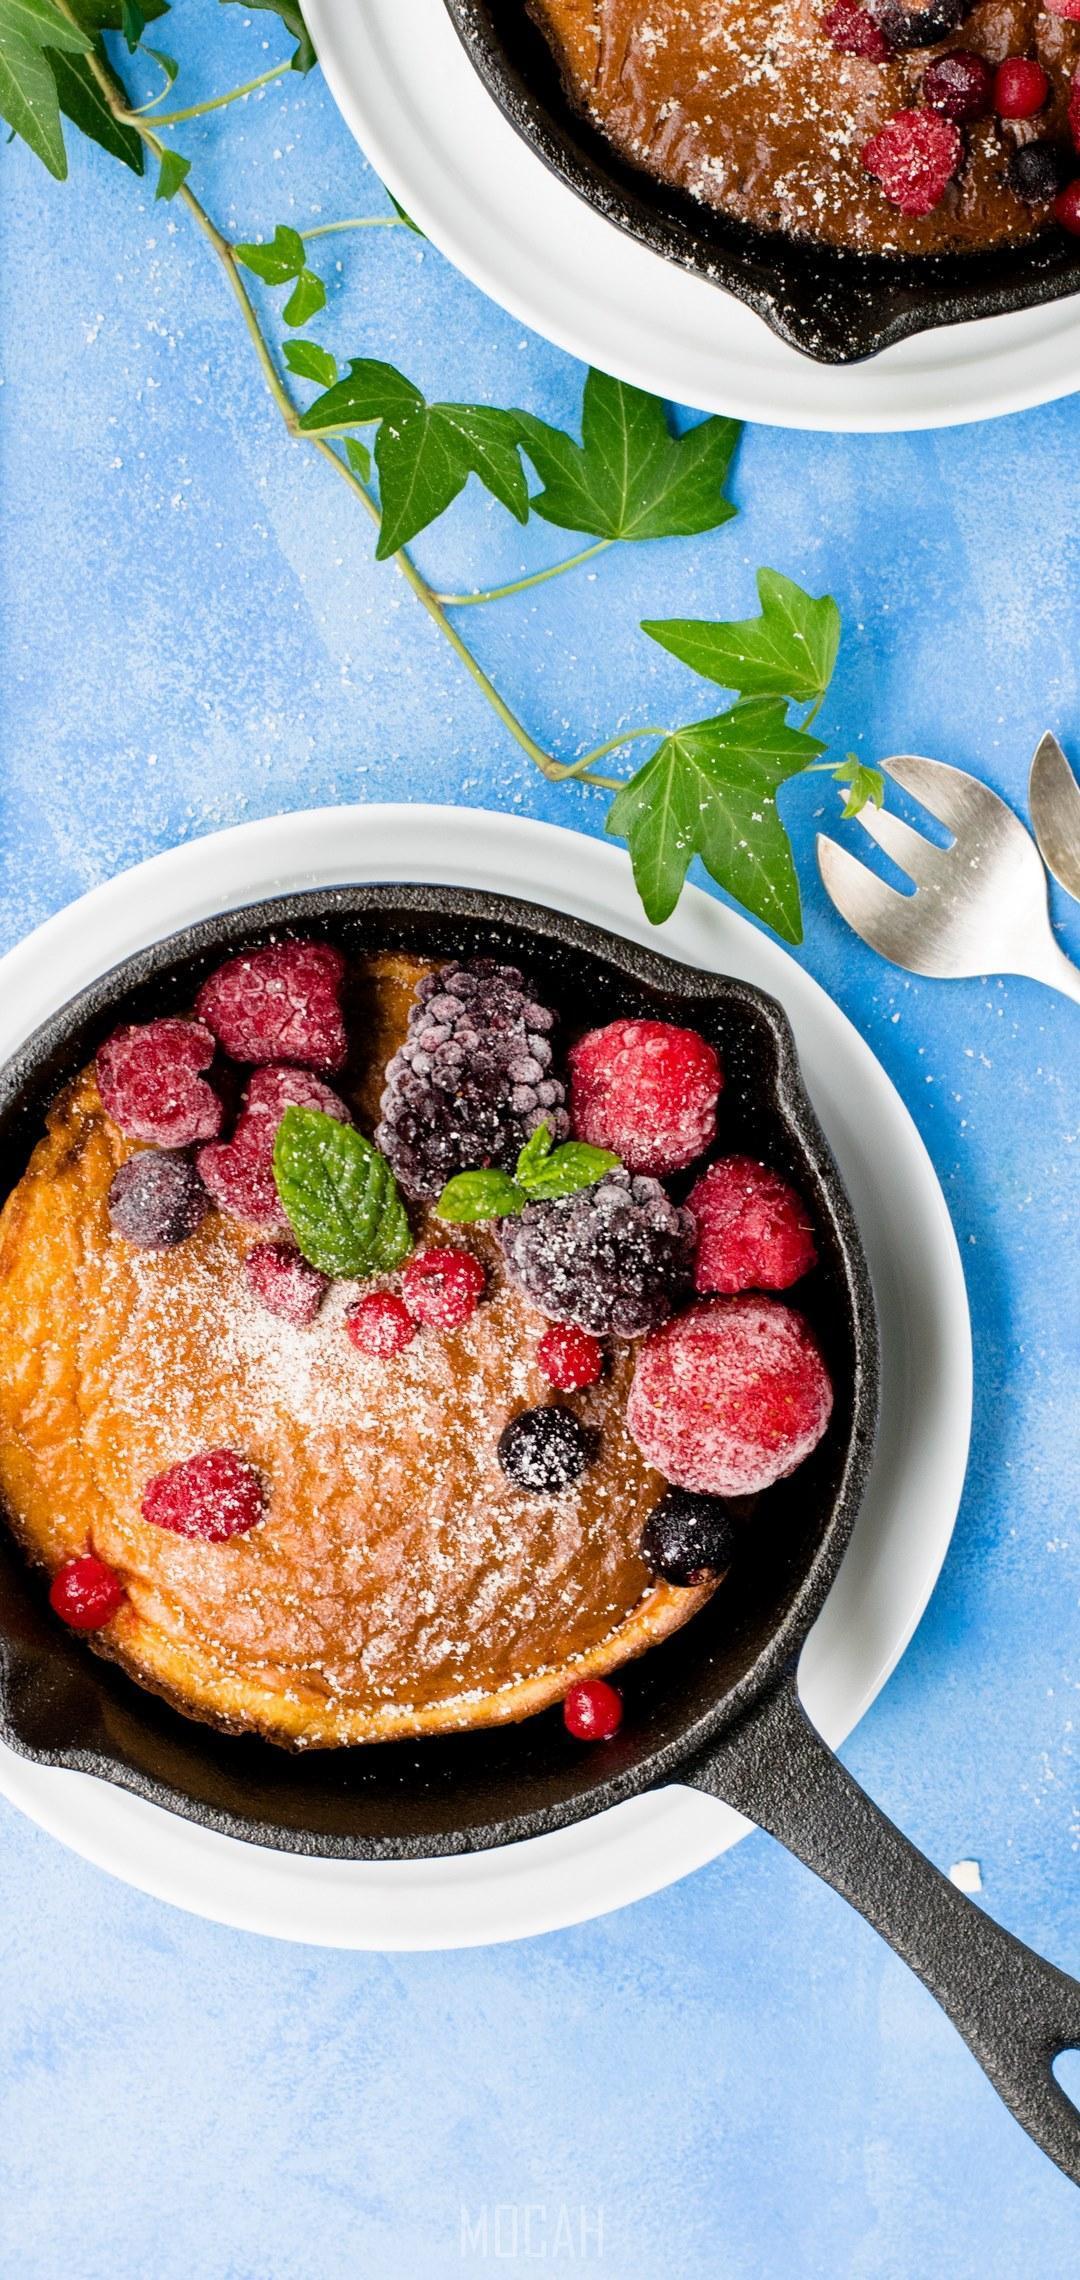 HD wallpaper, Dutch Baby Pancake, 1080X2280, Vivo V9 Wallpaper Free Download, Pancakes In Cast Iron Skillet With Berries And Blue Cloth